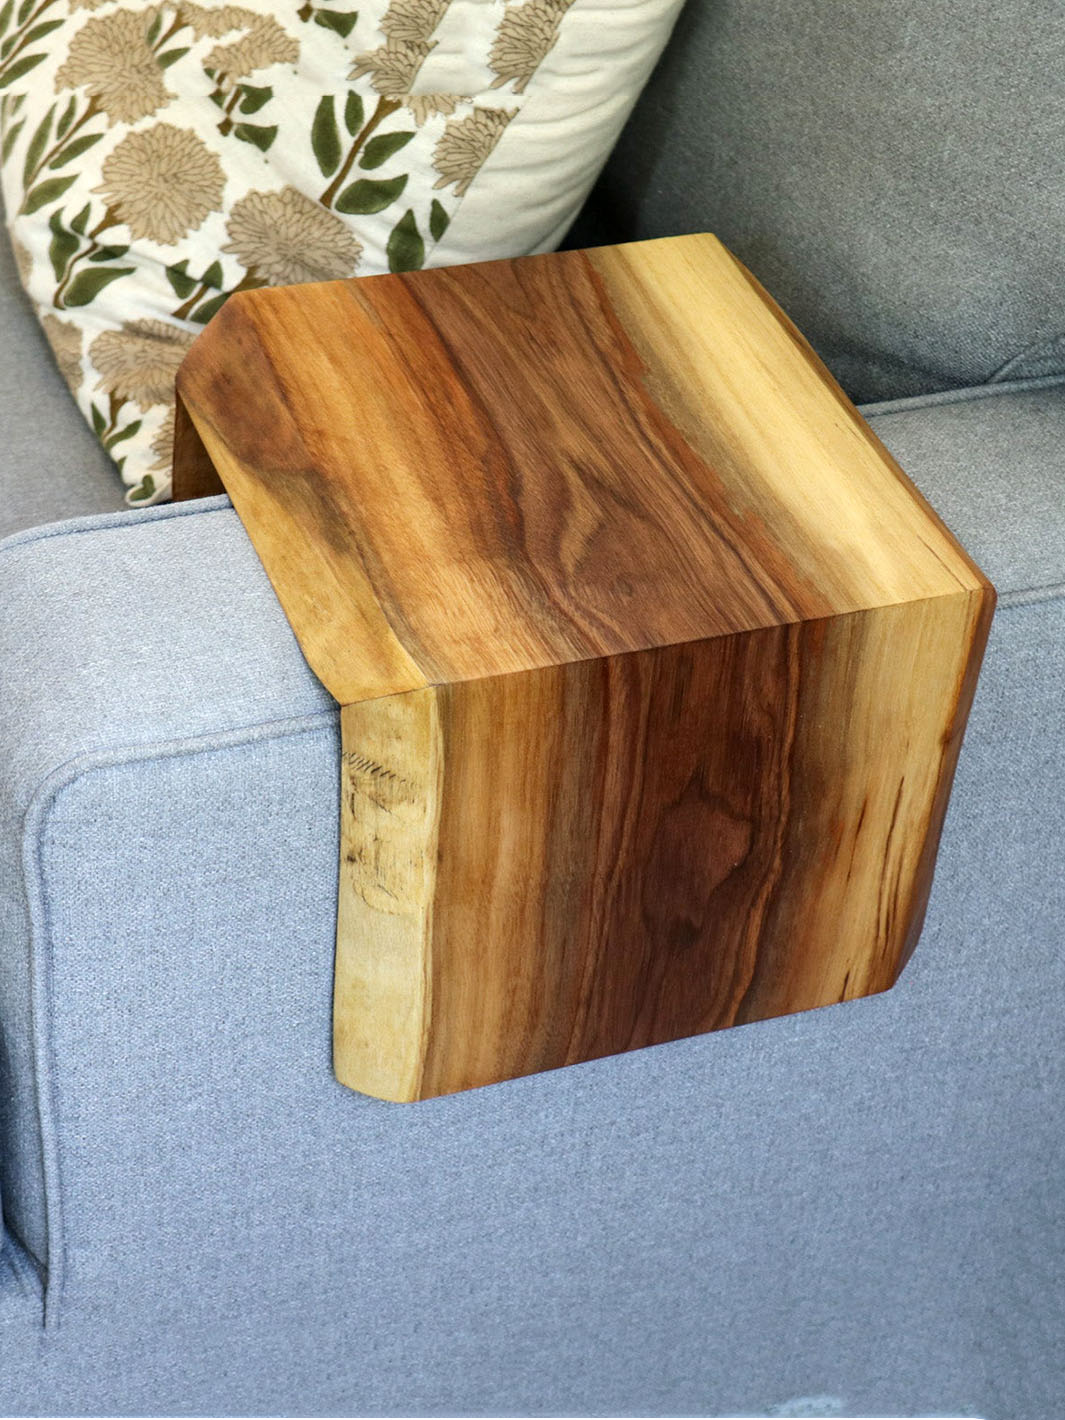 Pair of Live Edge 8" Walnut Wood Armrest Tables (in stock) Earthly Comfort Coffee Tables 2235-8